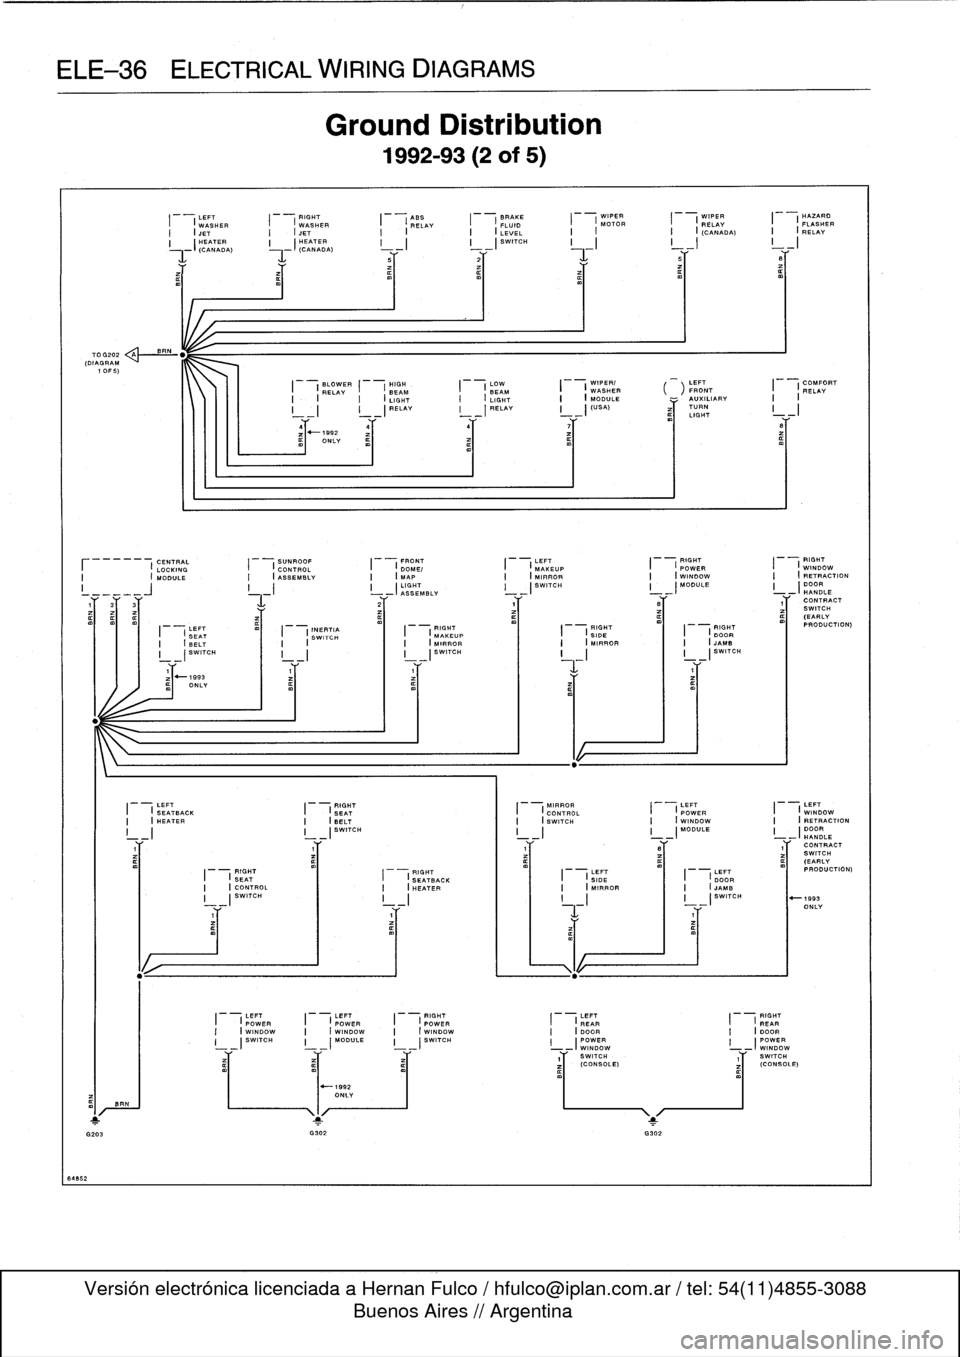 BMW 328i 1994 E36 Owners Guide 
ELE-36
ELECTRICAL
WIRING
DIAGRAMS

64852

70G202
(DIAGRAM
1
OF
5)

BR

BRN

LEFT

	

RIGHT

	

ASS

	

BRAKE

	

WIPER

	

WIPER

	

HAZARD
I

	

(
WASHER

	

I

	

(
WASHER

	

I

	

(
RELAY

	

I

